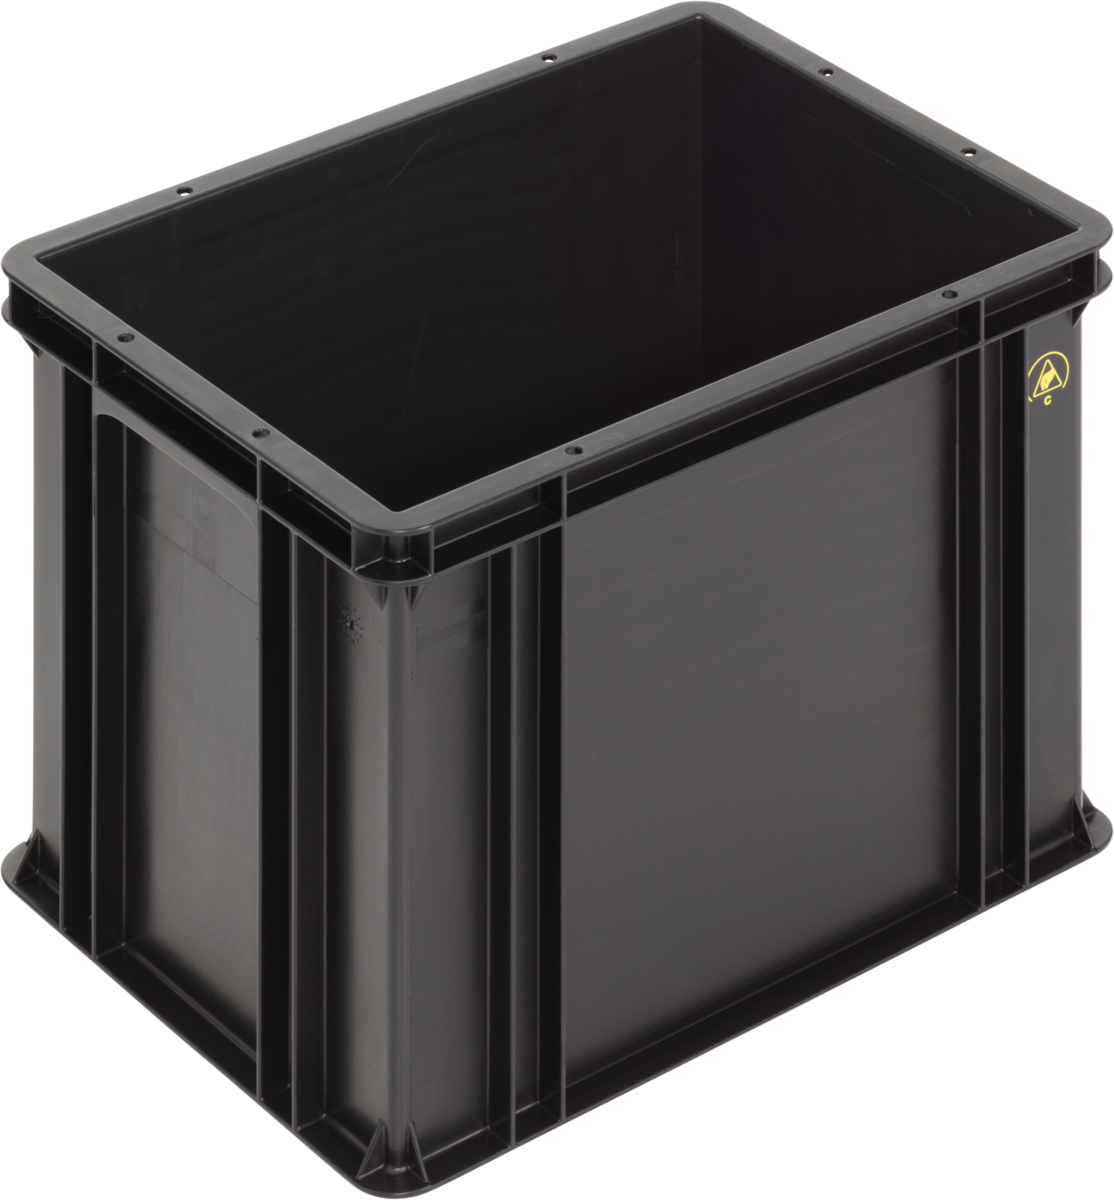 Anti-Static-ESD-Antistatic-Safe-SGL-Norm-Stacking-Bin-Containers-Flat-Base-Ref.-4332.007.992_1004410_400x300x320_01